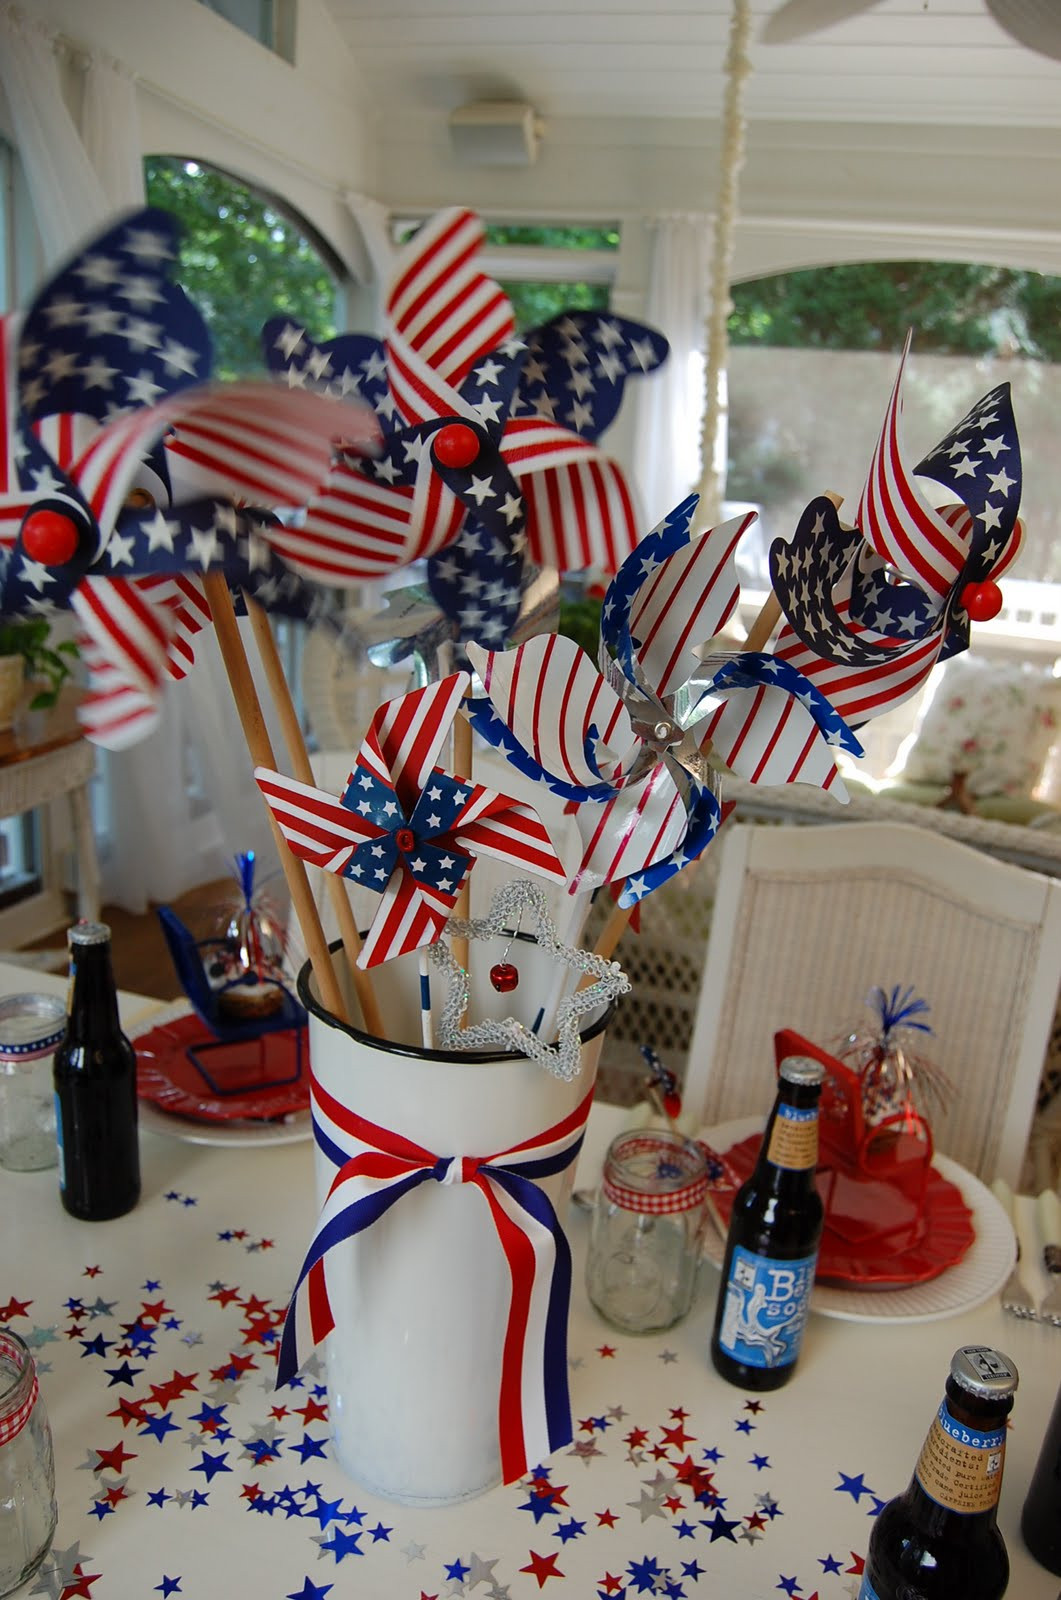 4th Of July Decorating Ideas
 A Patriotic Celebration Table Setting